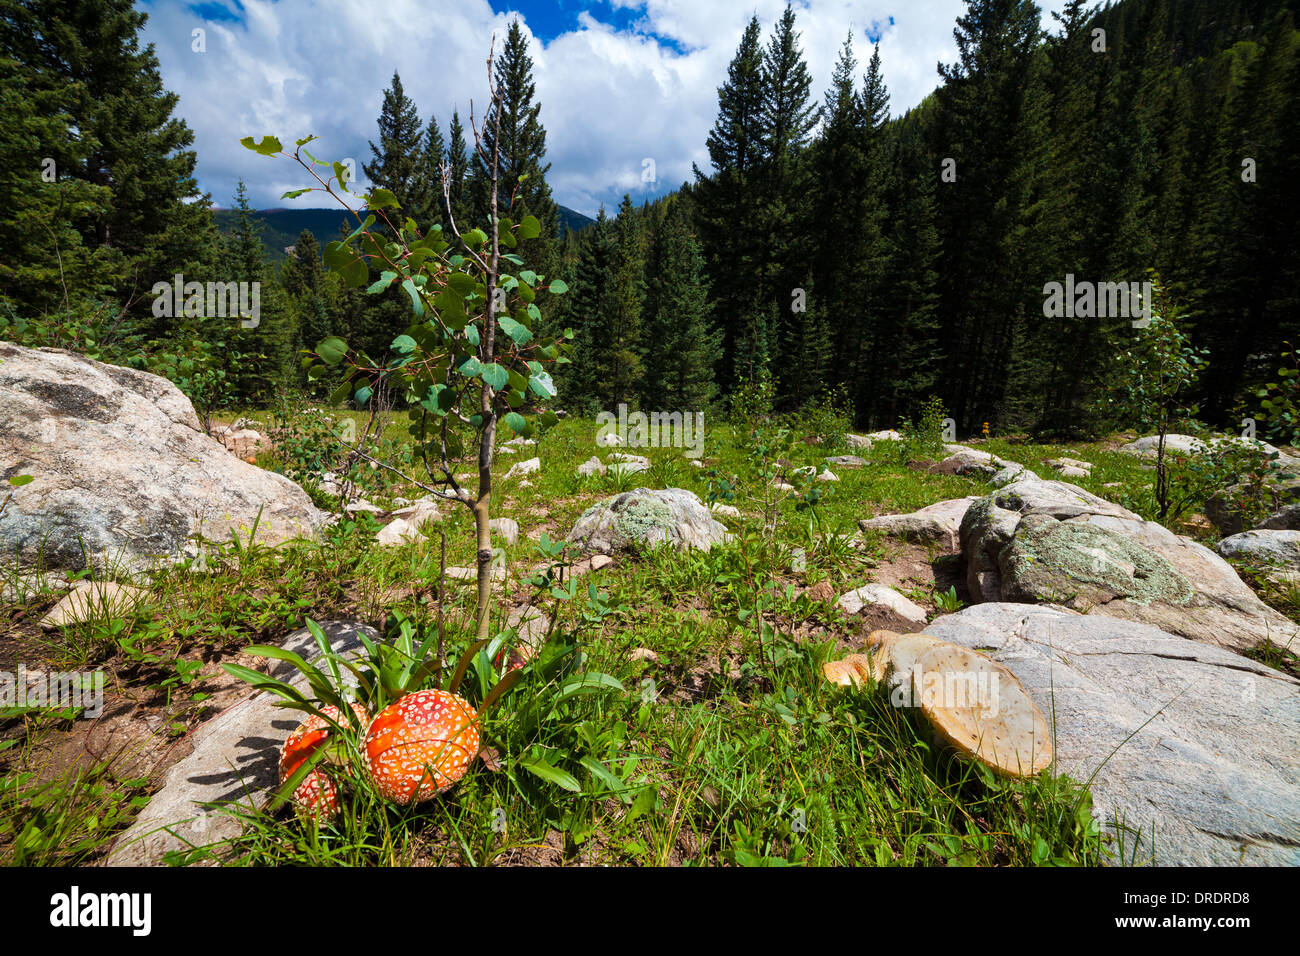 Wild mushrooms (Amanita Muscaria) are growing in a clearing in the Pecos Wilderness outside of Santa Fe, New Mexico. Stock Photo